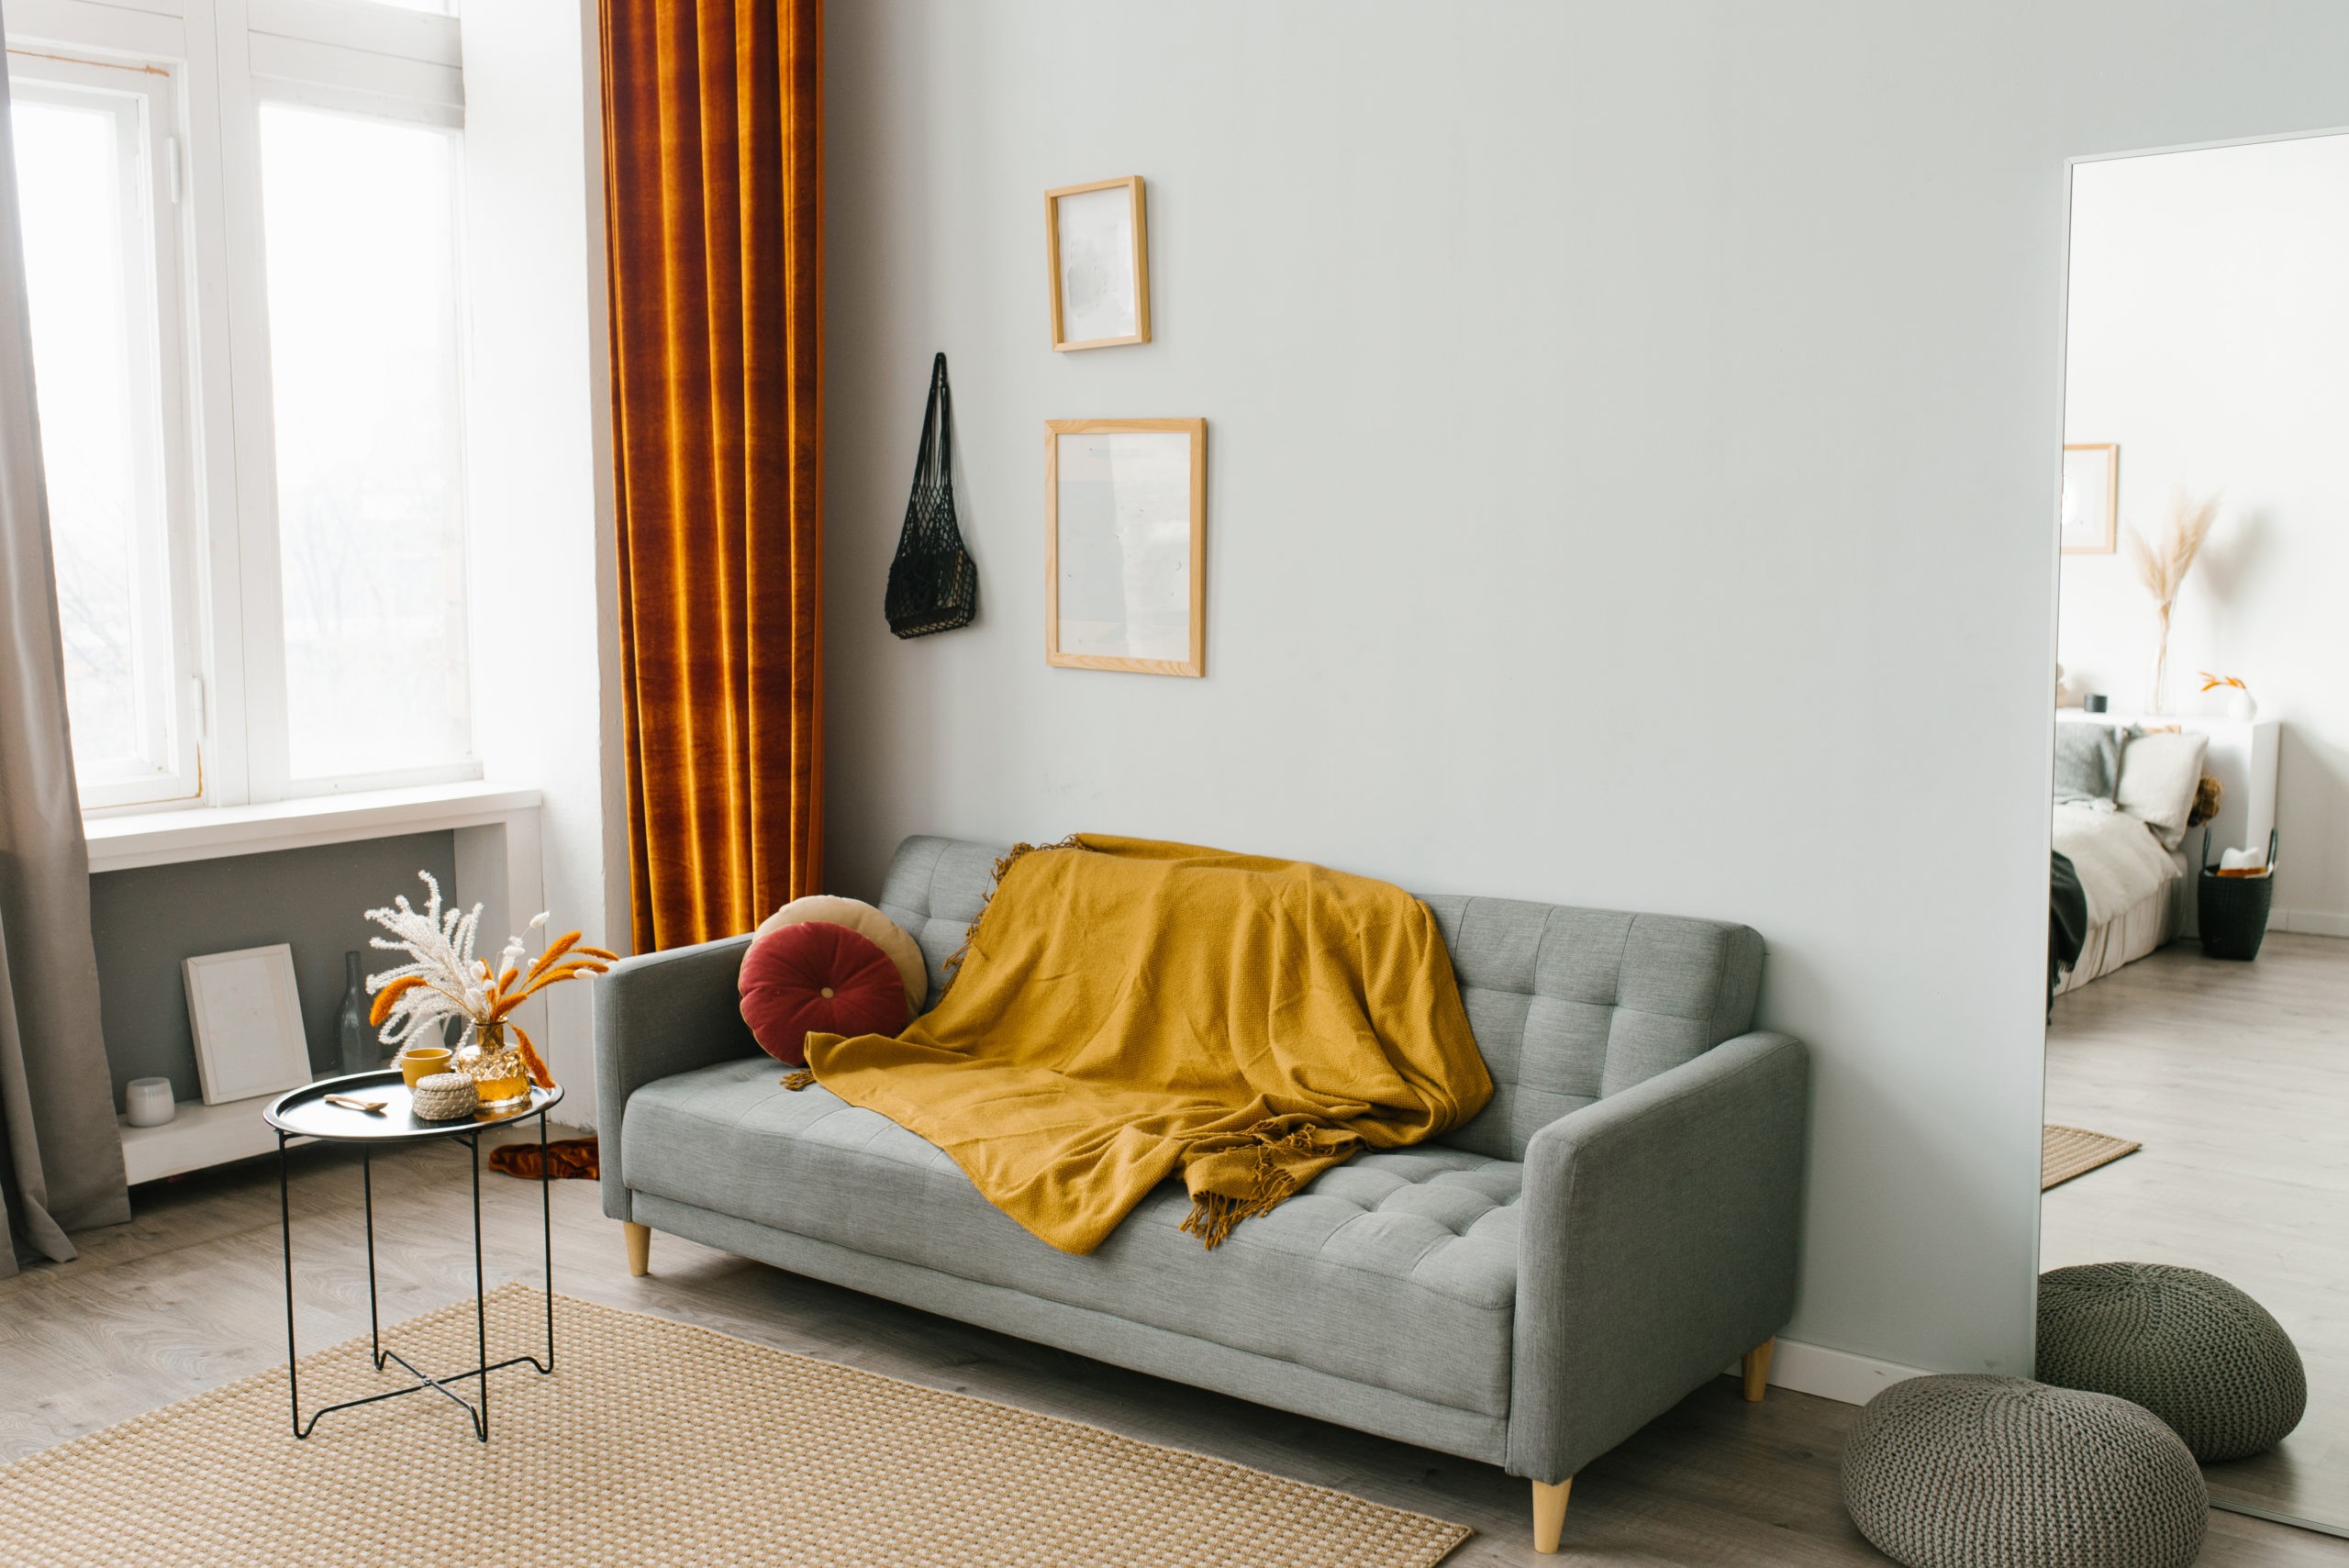 The interior of the living room in a Scandinavian minimalist style in gray-yellow-orange colors: sofa, coffee table, mirror.